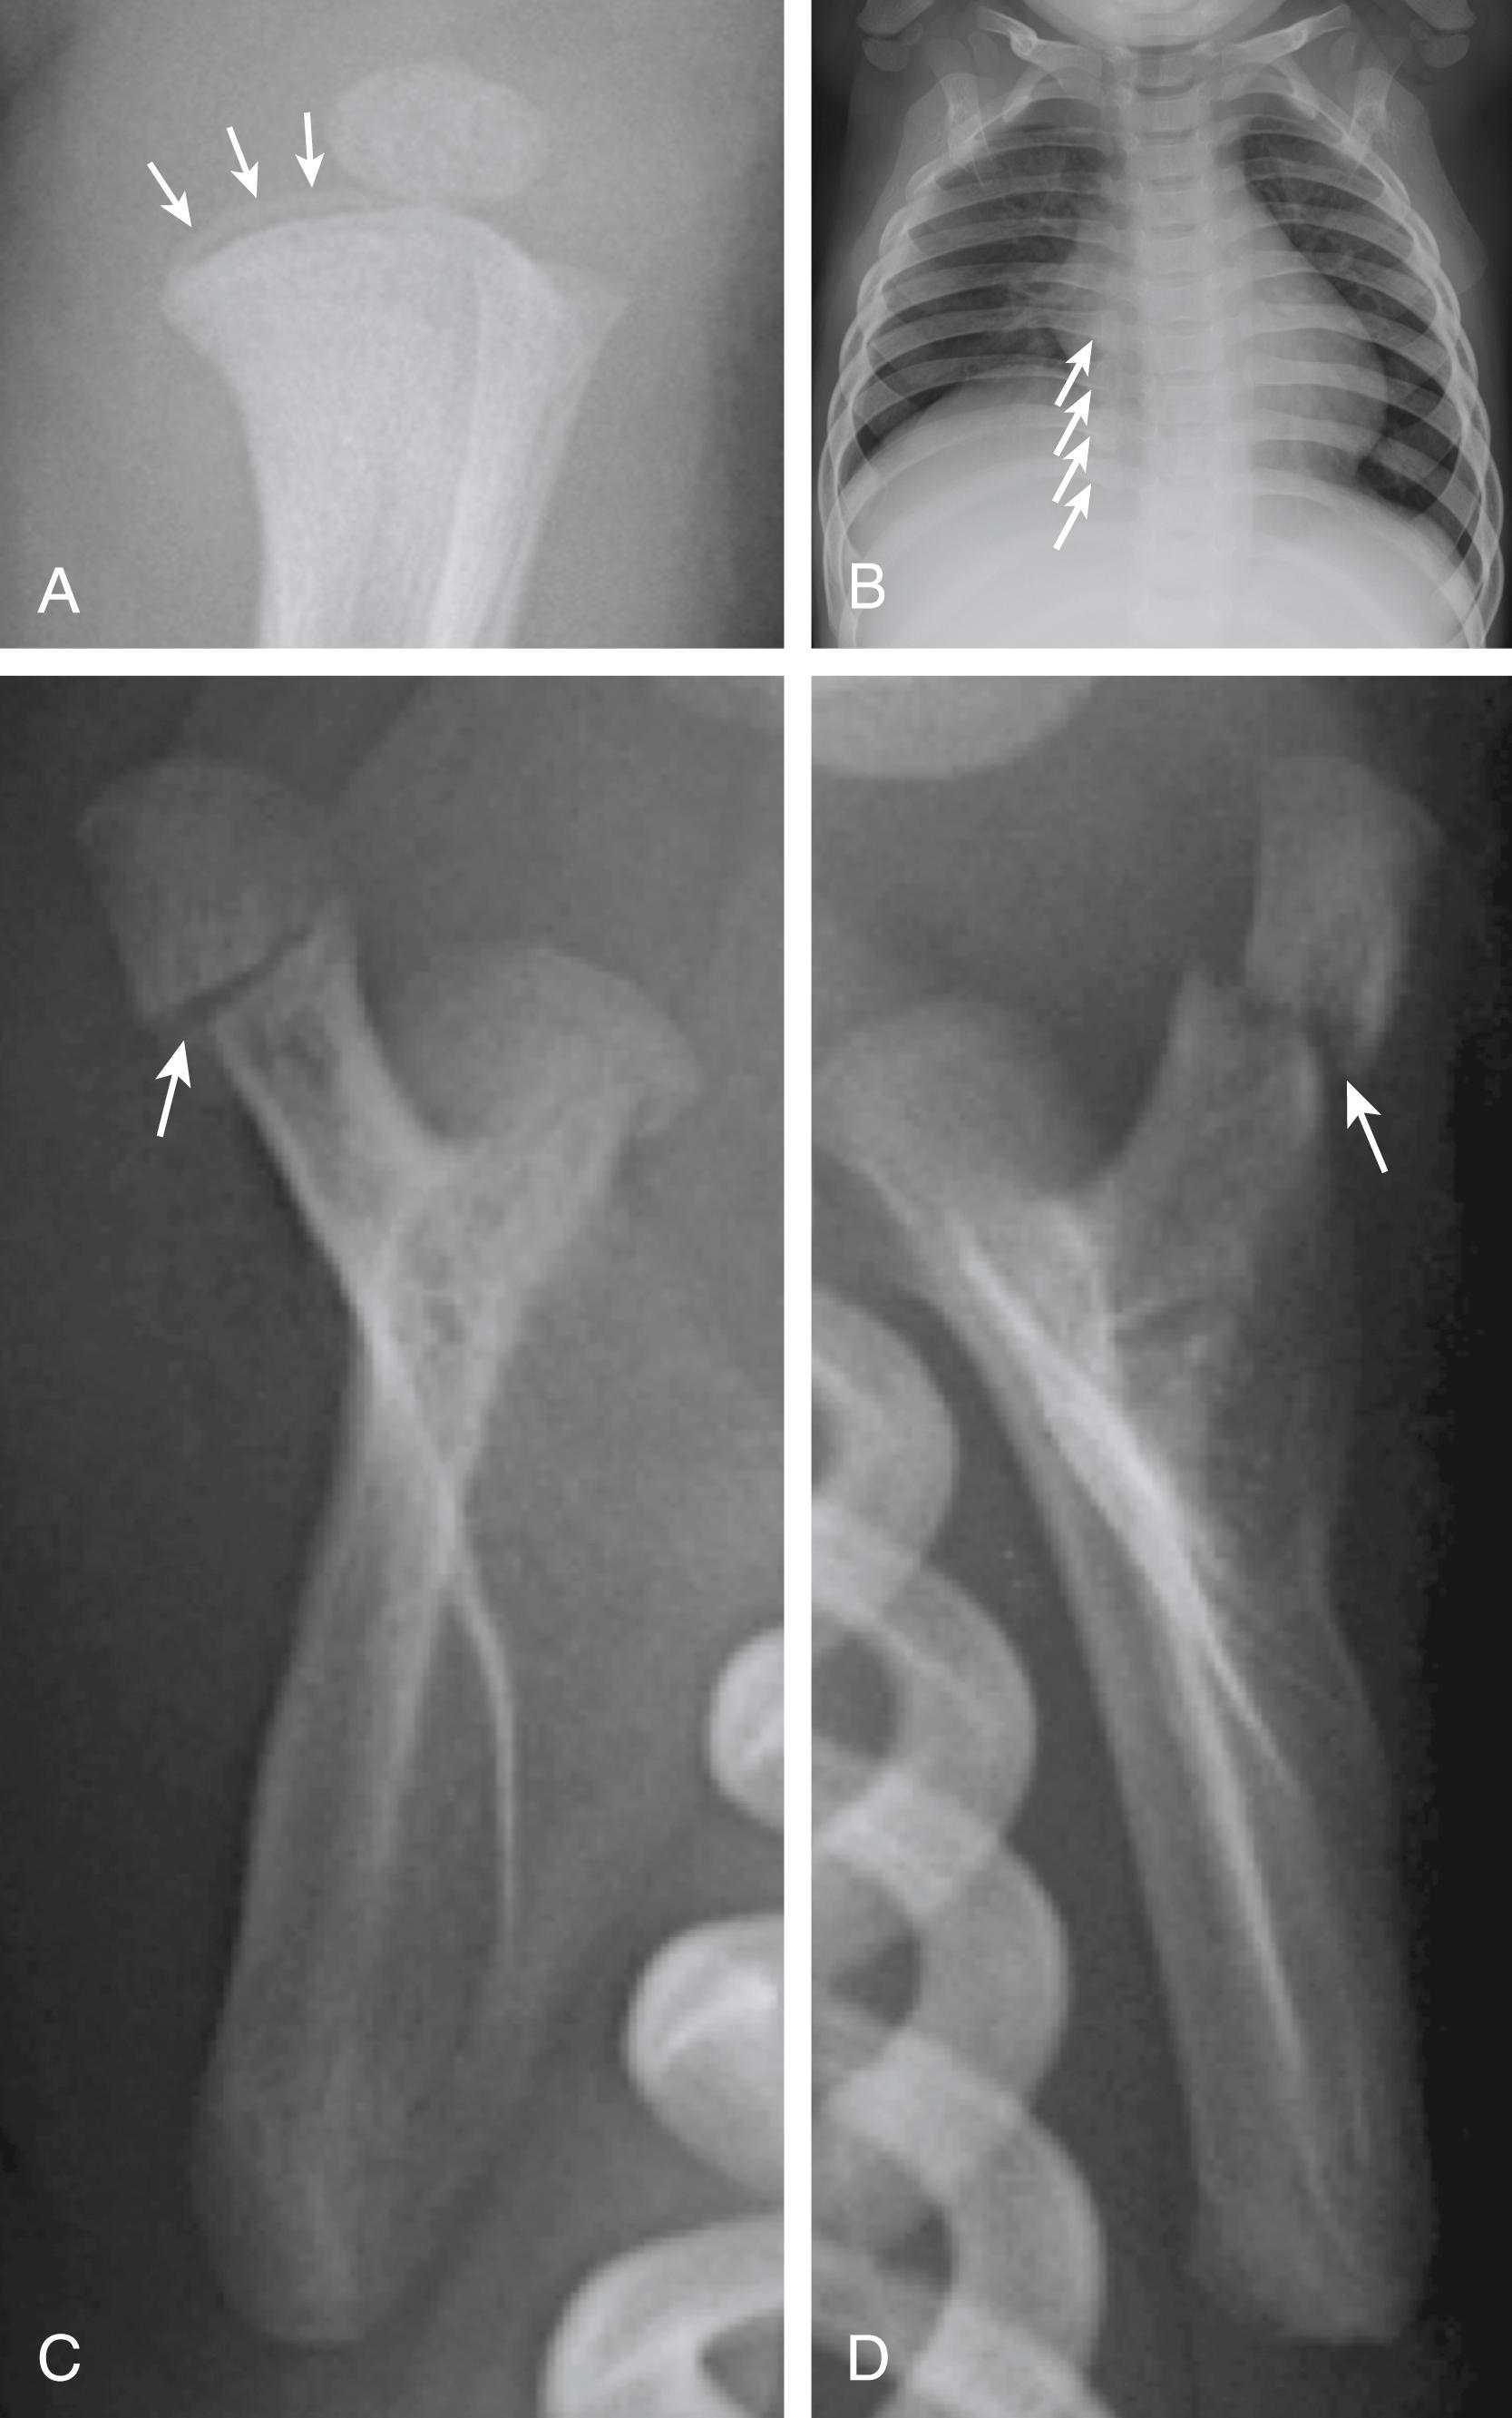 Fig. 30.5, Child abuse. A, Radiograph of the proximal lower leg in a 23-day-old infant with fussiness and suspected lower extremity pain reveals a classic metaphyseal lesion of the proximal tibia with a bucket-handle configuration (arrows) . B, Chest radiograph in a 12-month-old boy presenting with constipation reveals multiple consecutive rib fractures, seen posteriorly near the costovertebral junctions (arrows) . Fractures are healing, with callous formation evident. The patient had several additional rib head fractures better profiled on other views obtained as part of a complete skeletal survey. C, D, Radiographic views of the bilateral scapulae reveal minimally displaced fractures of the acromion processes (arrows) in an infant with multiple fractures of different ages on skeletal survey.